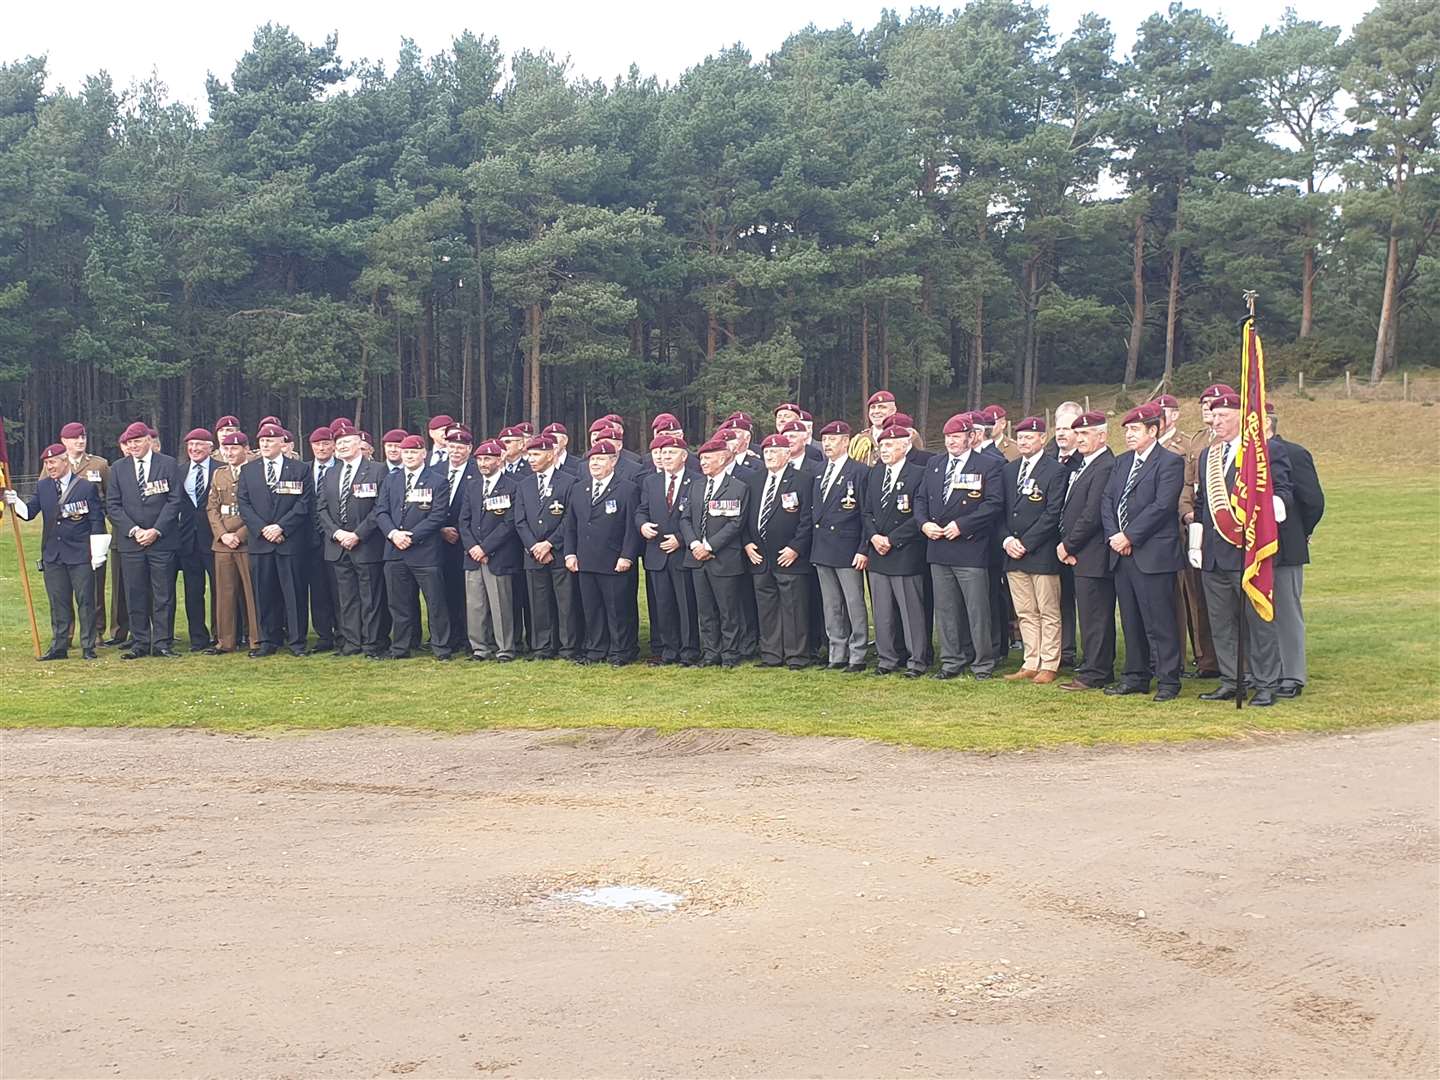 Veterans at the funeral in Lossiemouth of former paratrooper Mike Granitza.